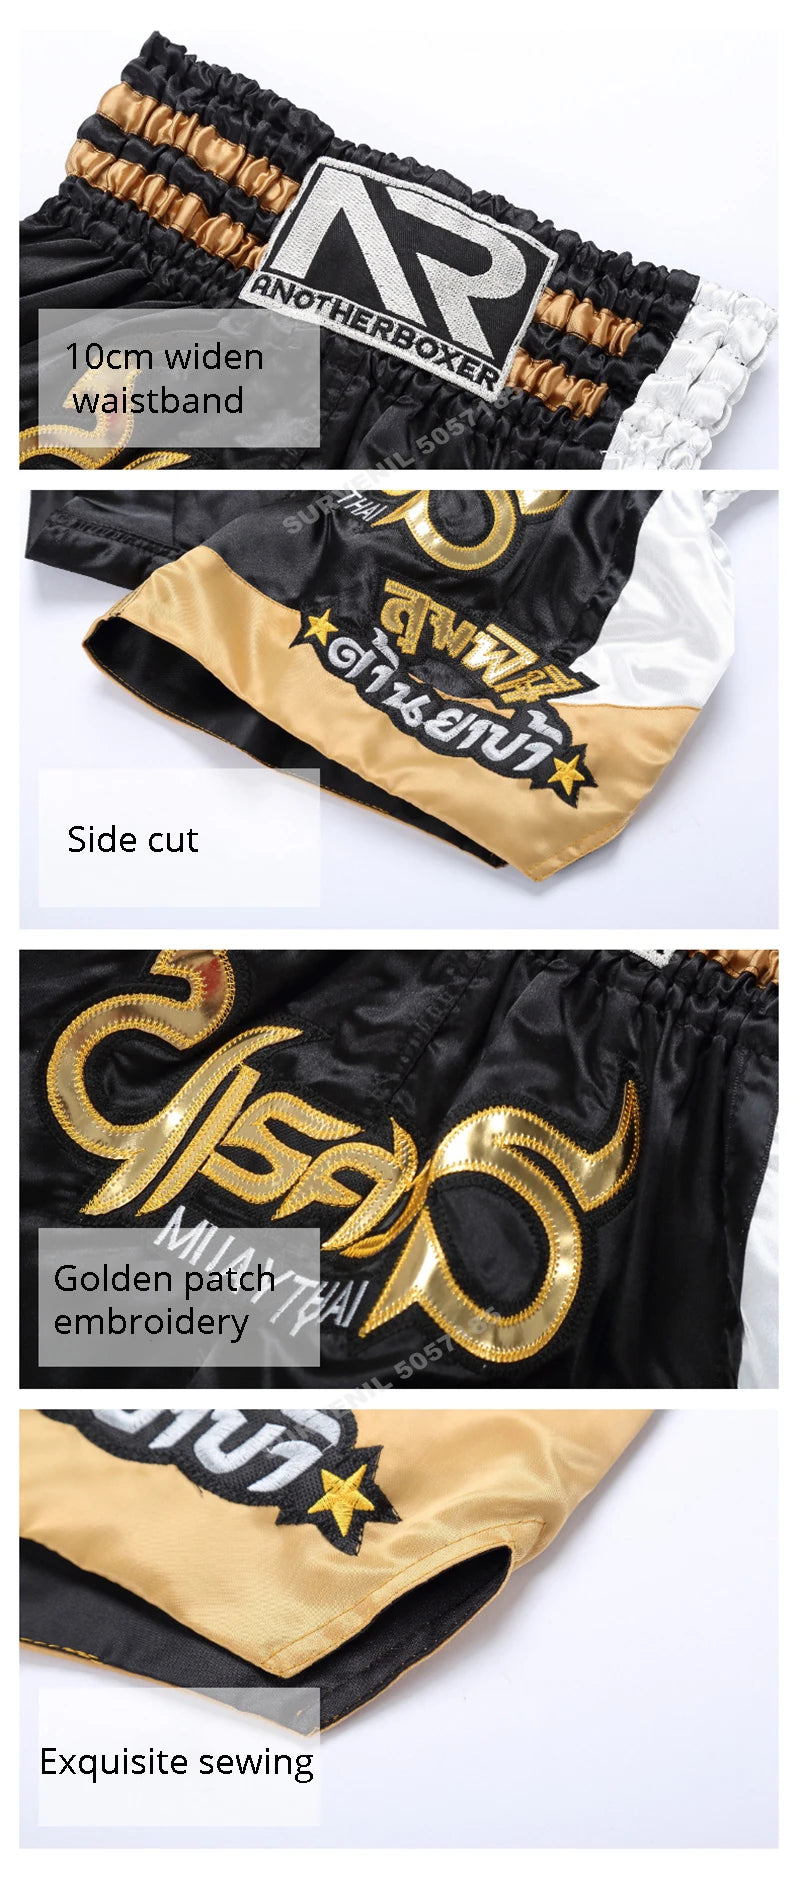 Muay Thai Shorts Embroidery Boxing Shorts Womens Mens Kids Kickboxing Fight Shorts Free Combat Grappling Martial Arts Clothing The Clothing Company Sydney